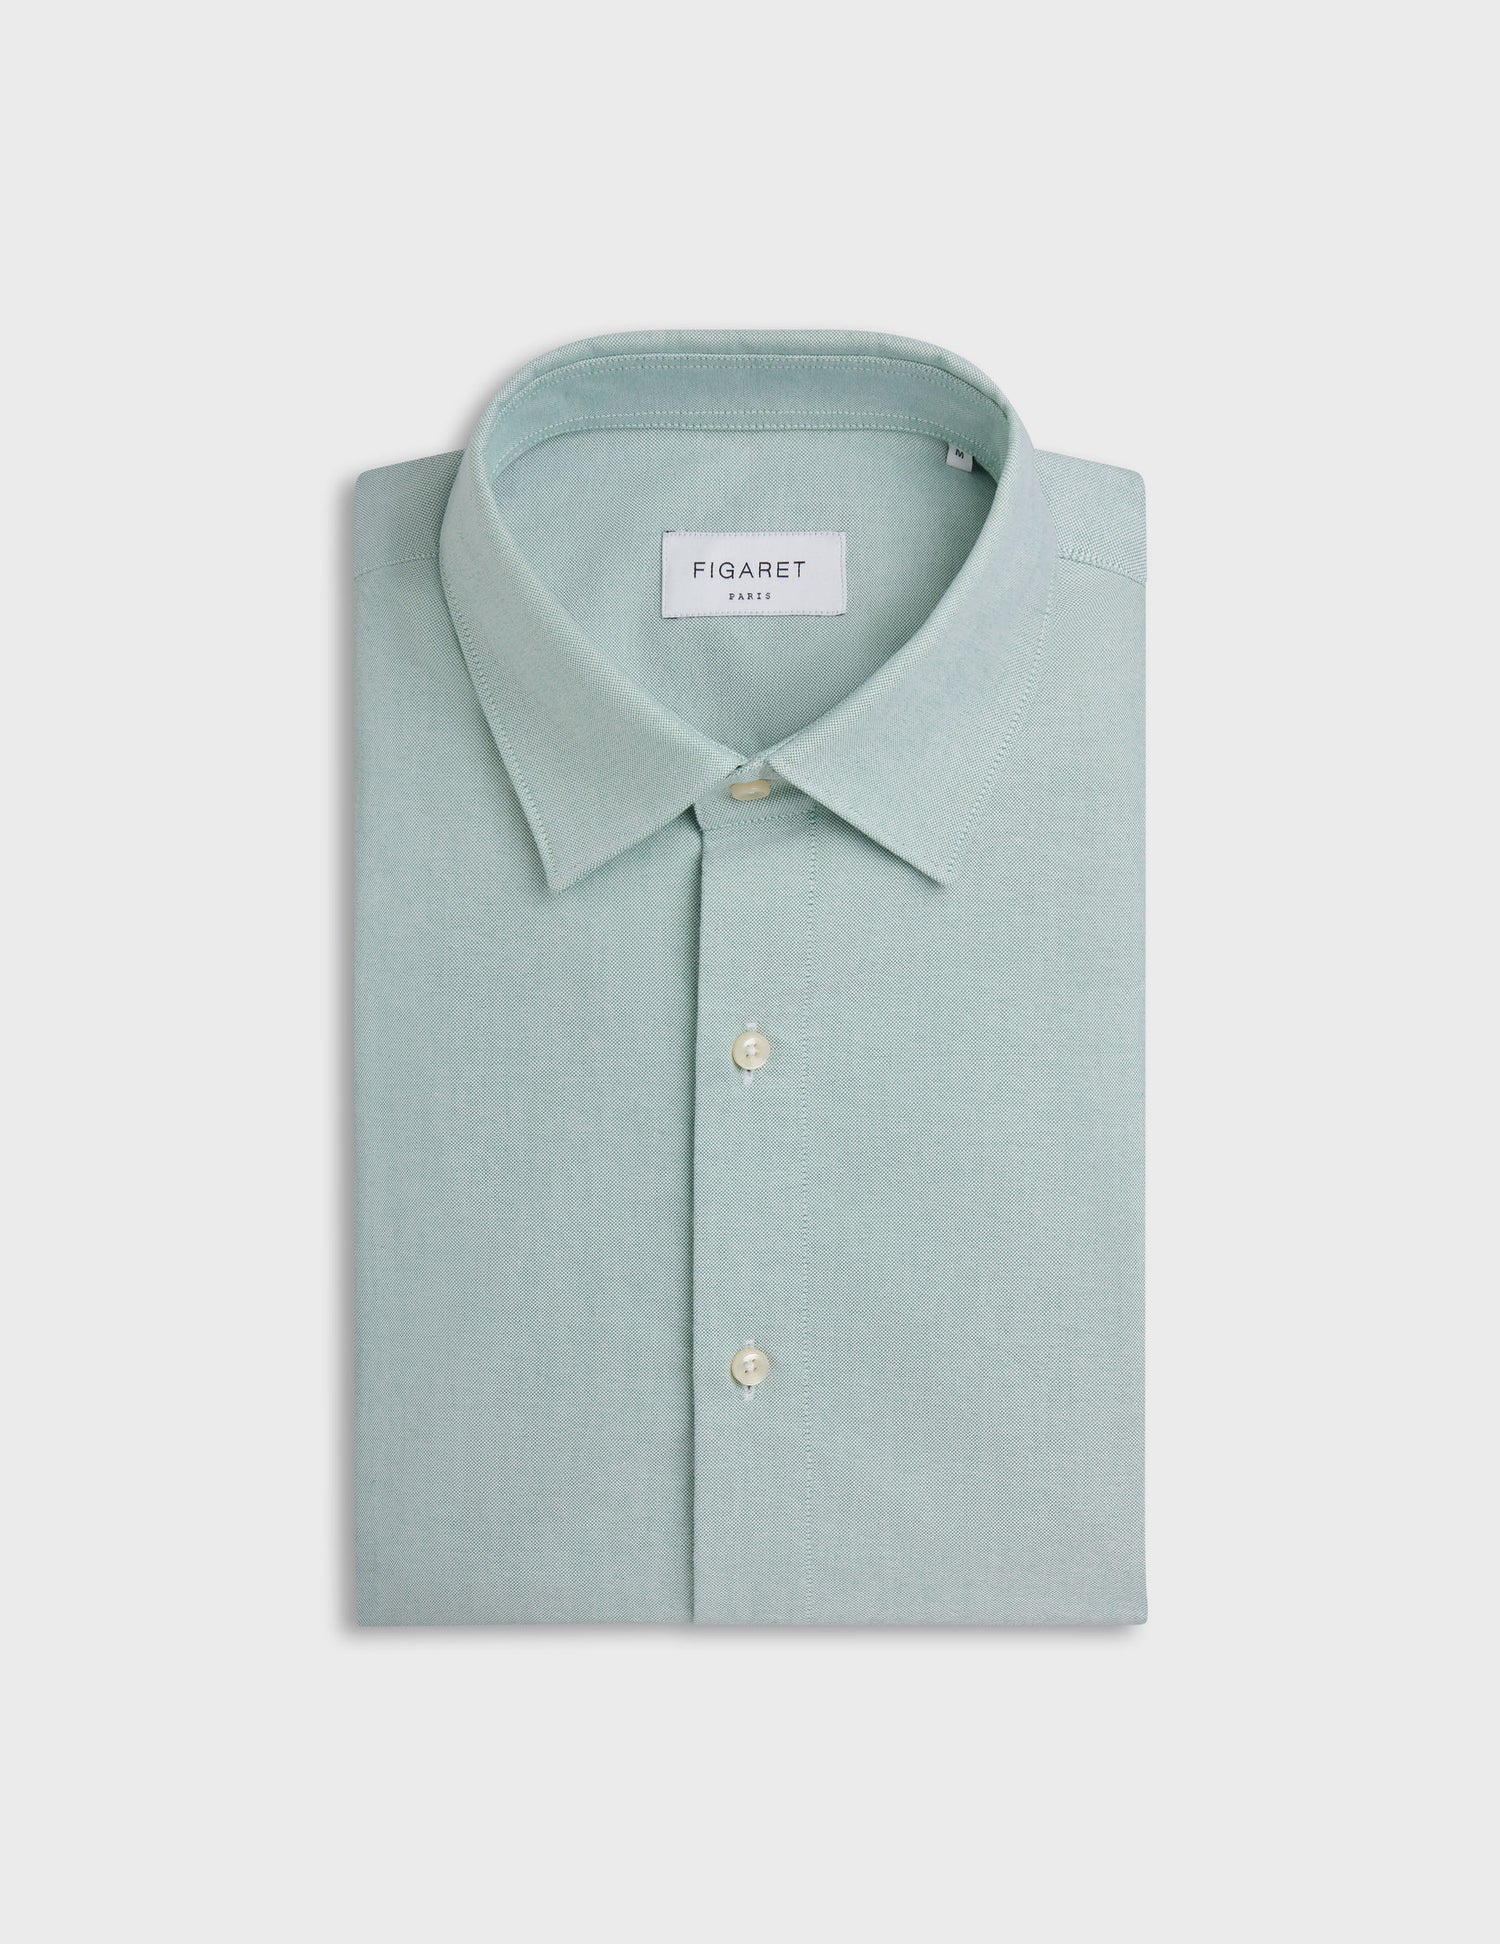 Light green Auguste shirt - Oxford - French Collar#4